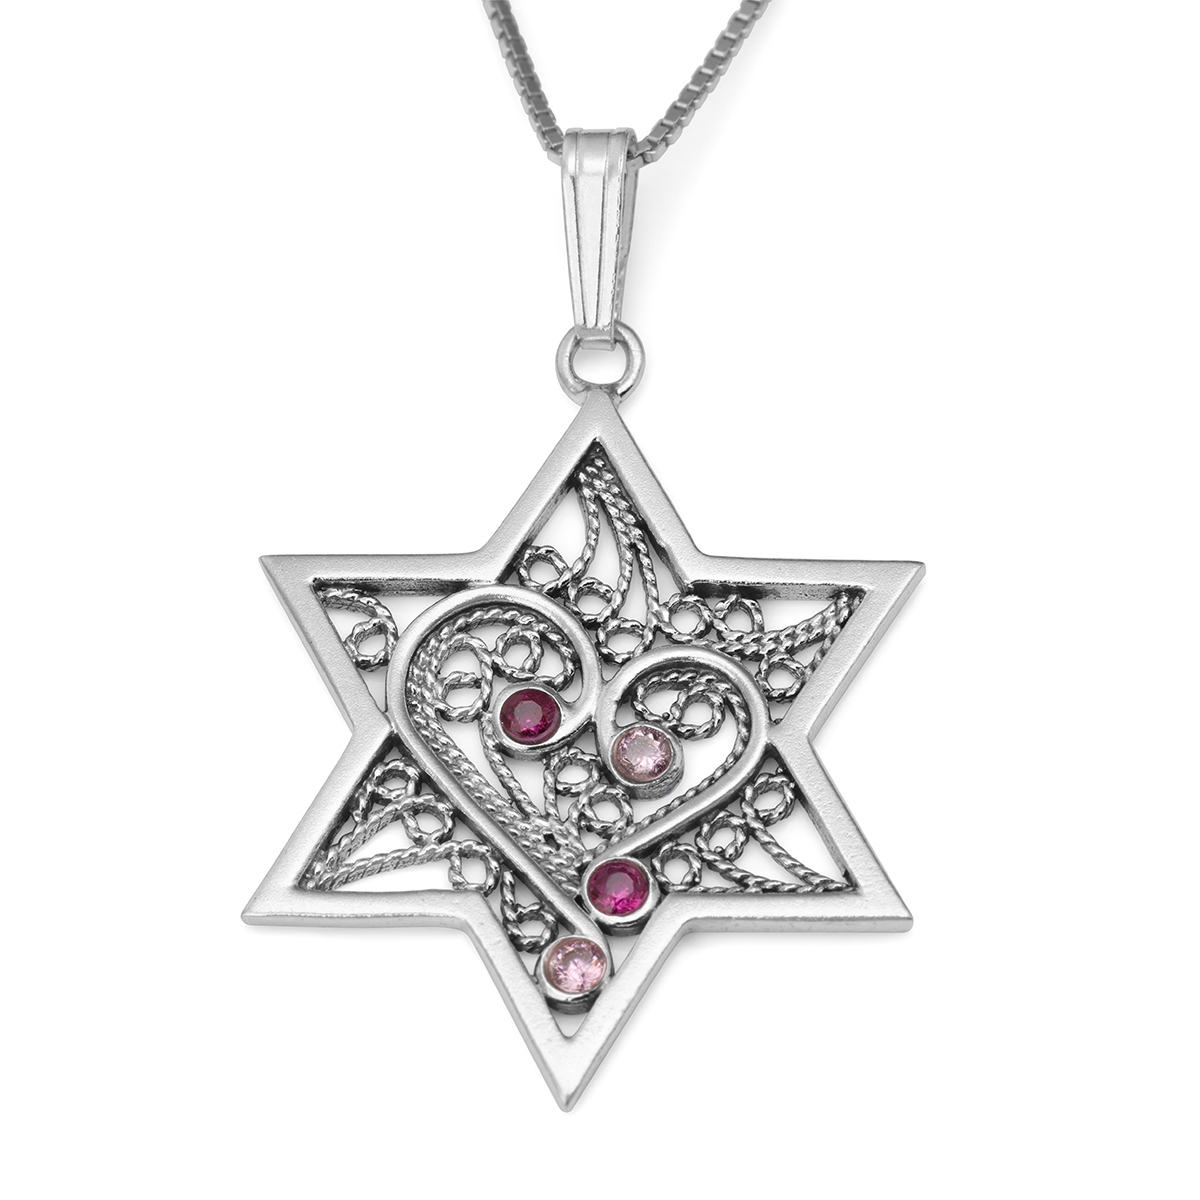 Gem-Studded Handcrafted Star of David Necklace With Filigree Heart Design - 1